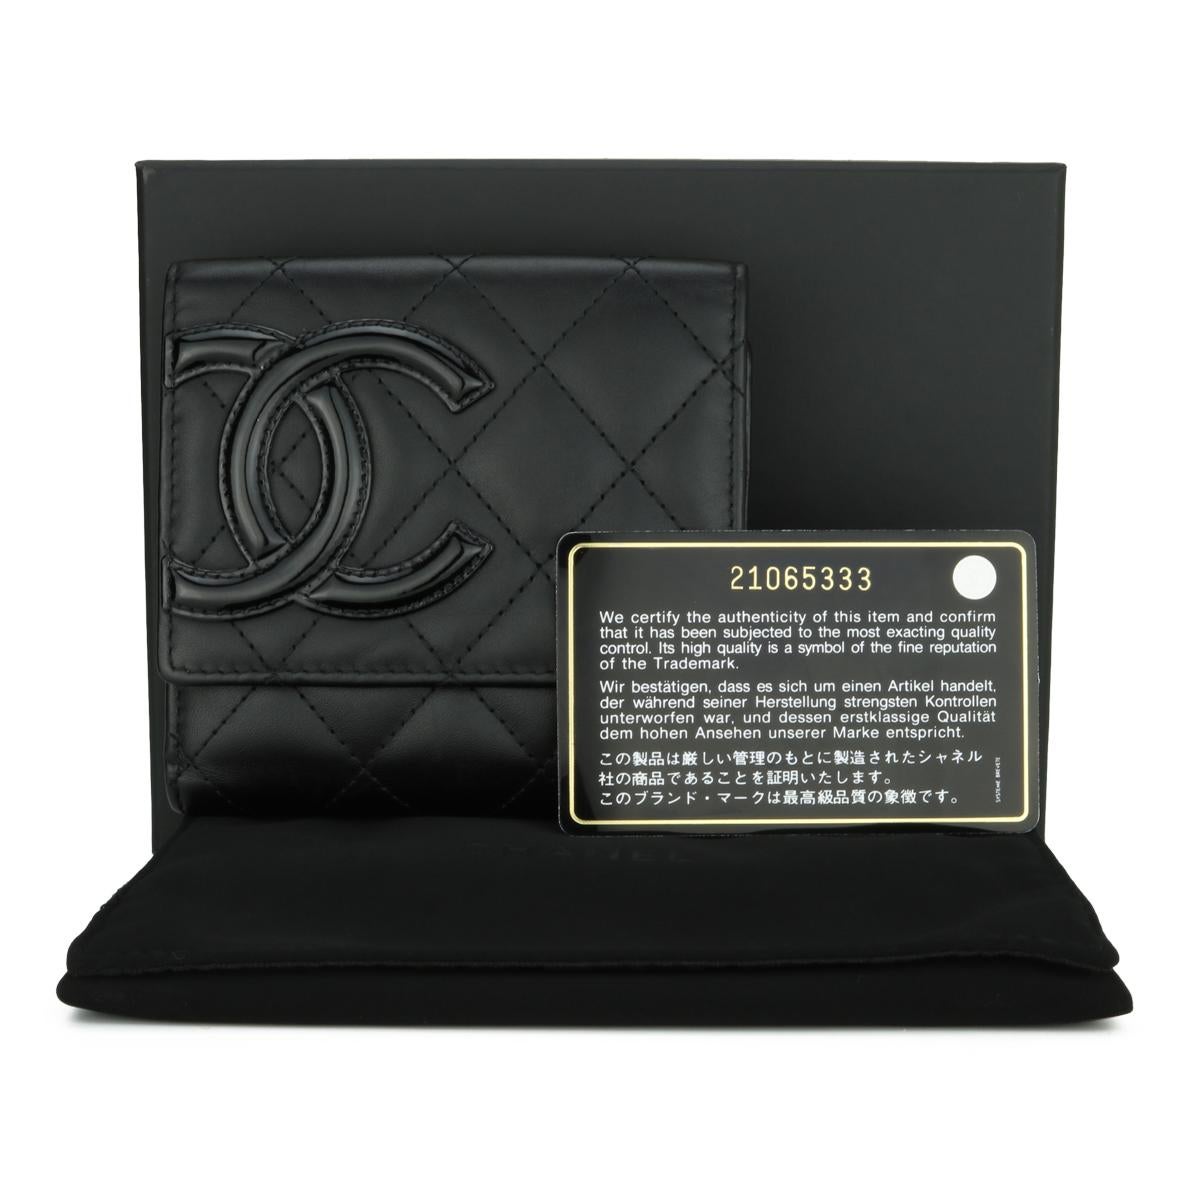 CHANEL Quilted Trifold Cambon Small Flap Wallet Black Calfskin Silver Hardware 2016.

This stunning wallet is in very good condition, the wallet still holds its original shape, and the hardware is still very shiny.

- Exterior Condition: Very good